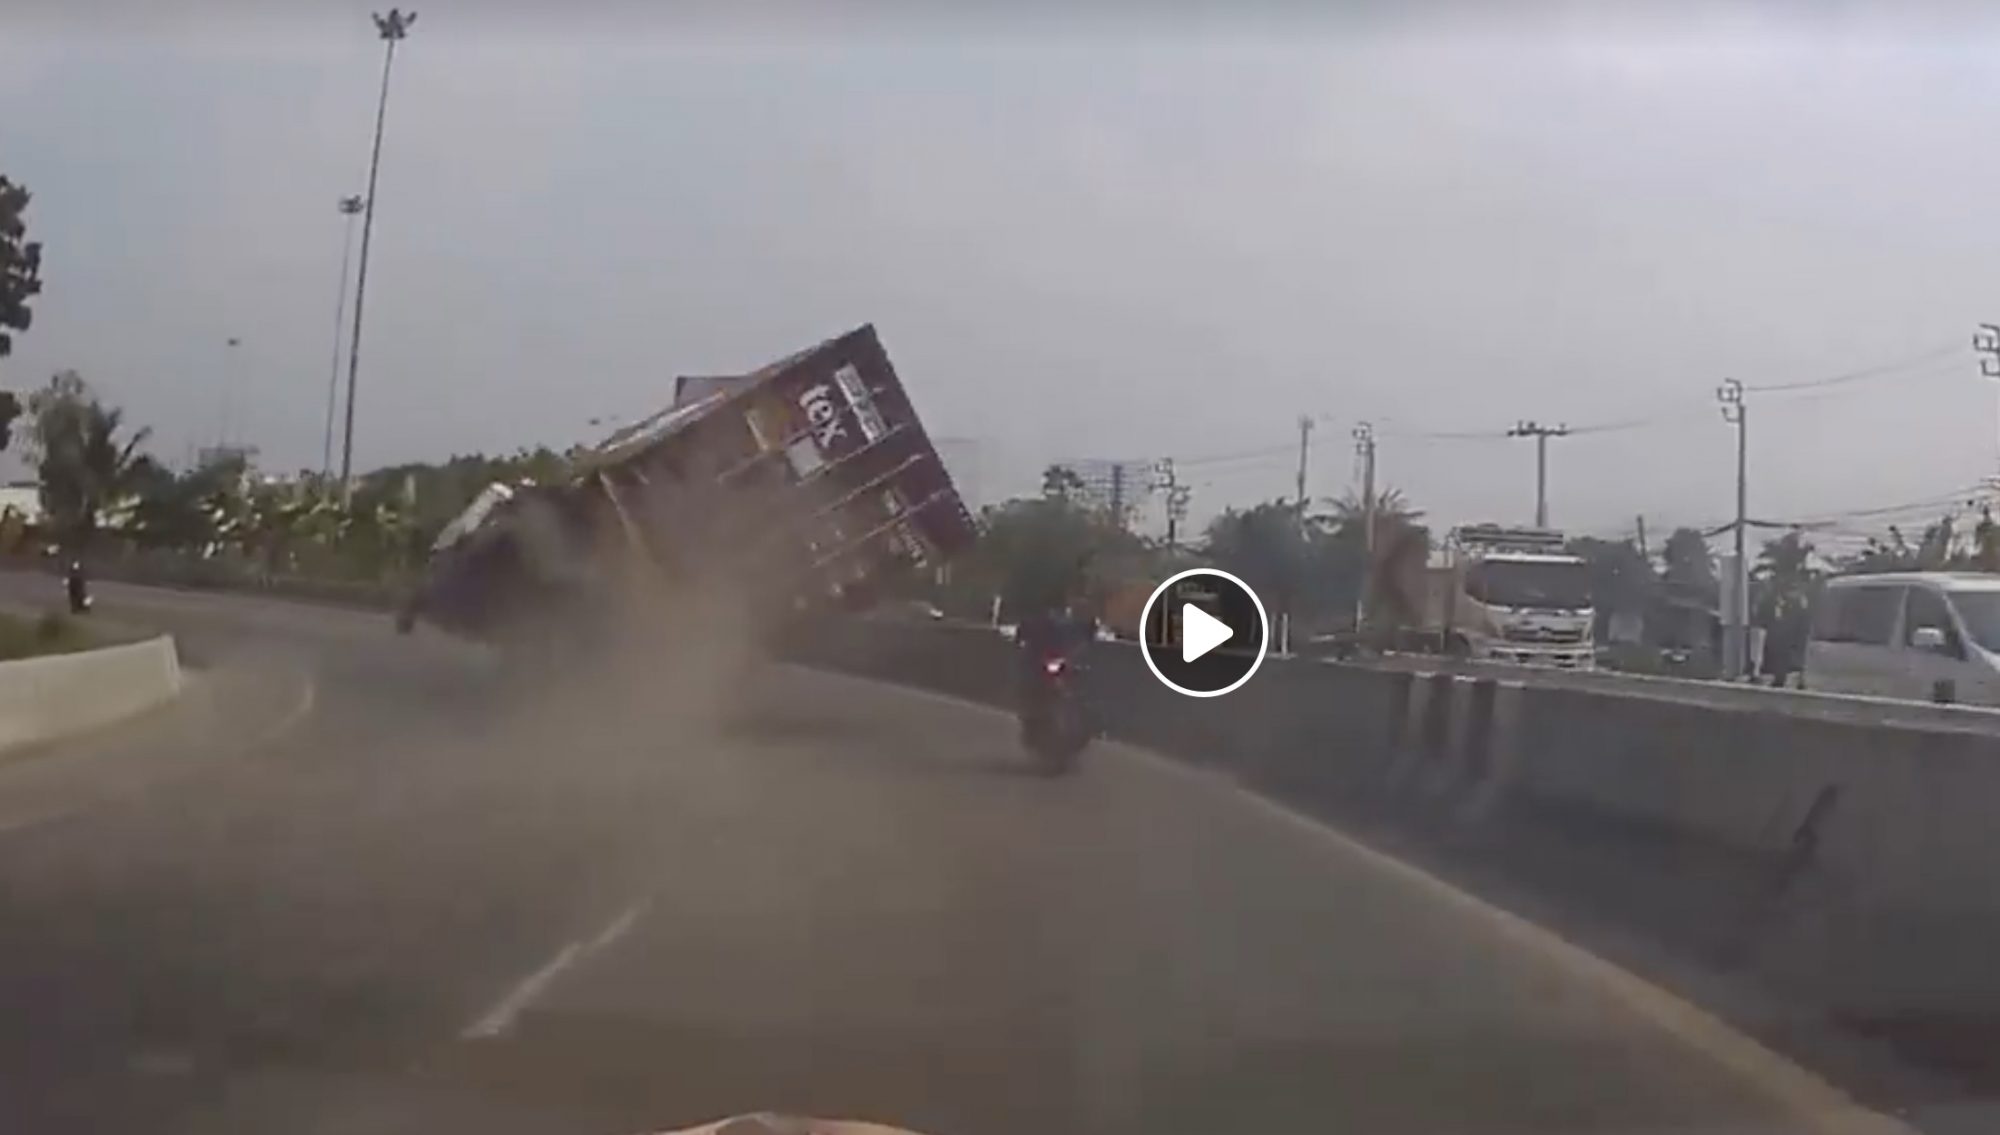 Motorcyclist Misses Truck Tipping Over